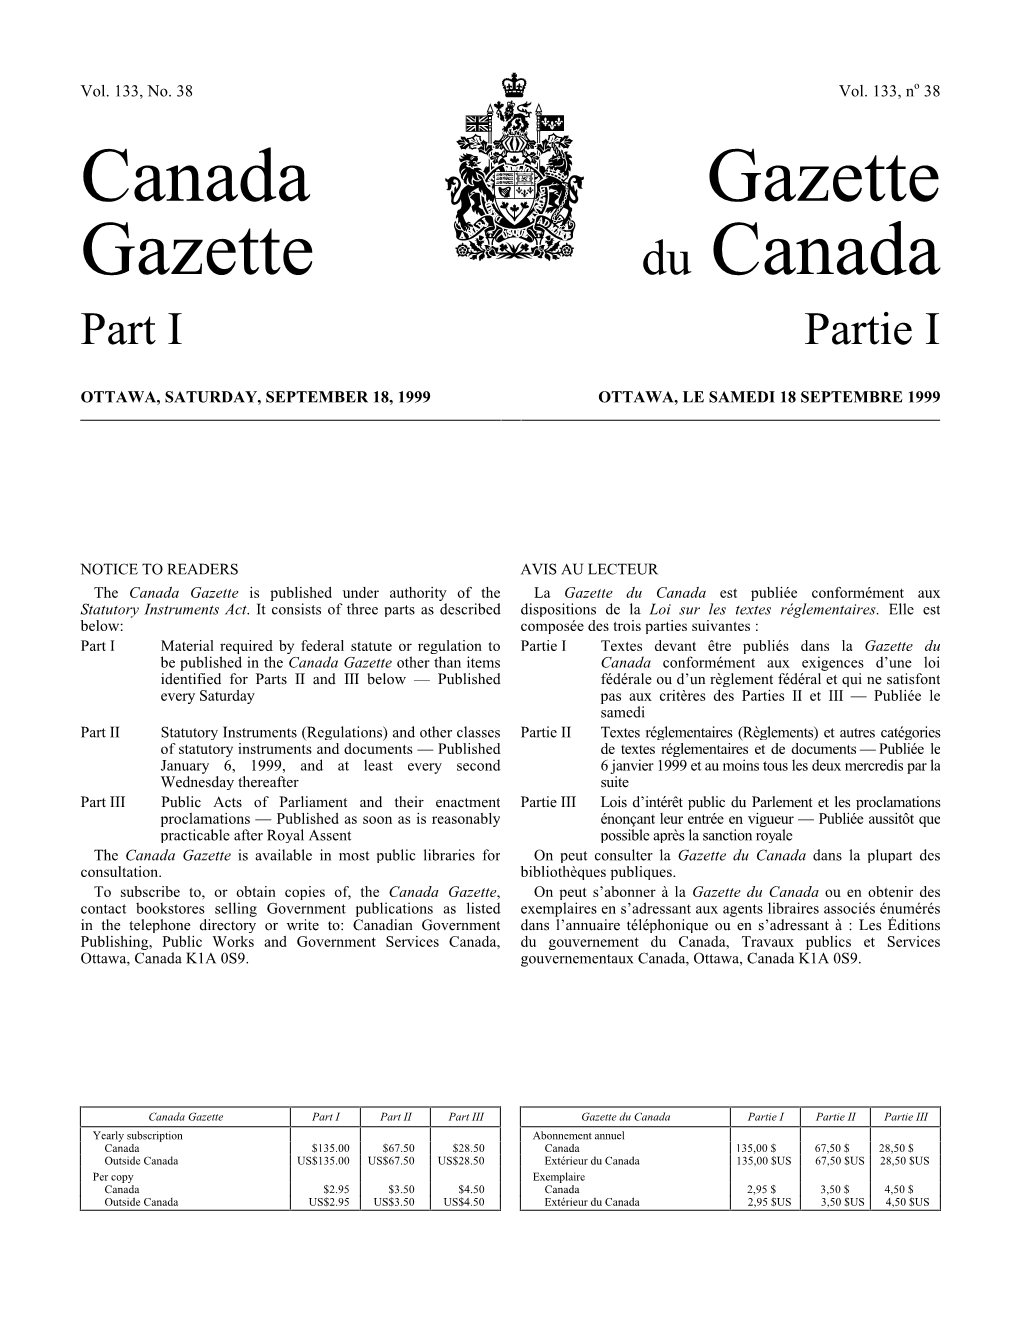 Canada Gazette, Part I, on May 8, 1999